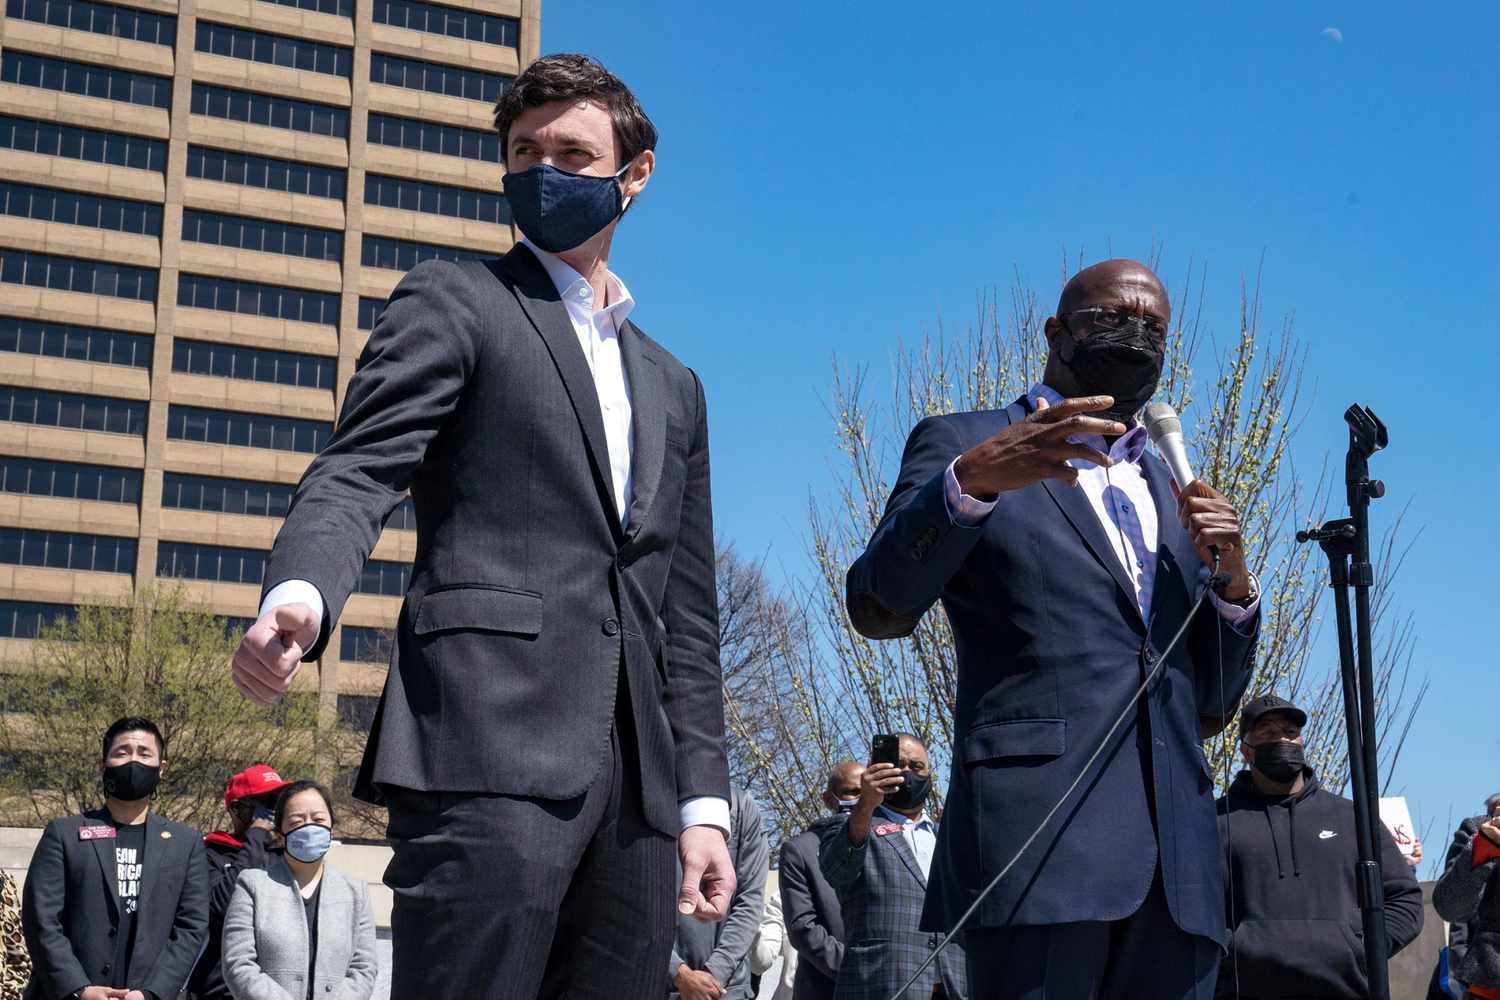 Sen. Jon Ossoff (D-GA) and Sen. Raphael Warnock (D-GA) speak to a group of demonstrators showing their support for Asian-American and Pacific Islander communities on March 20, 2021 in Atlanta, Georgia